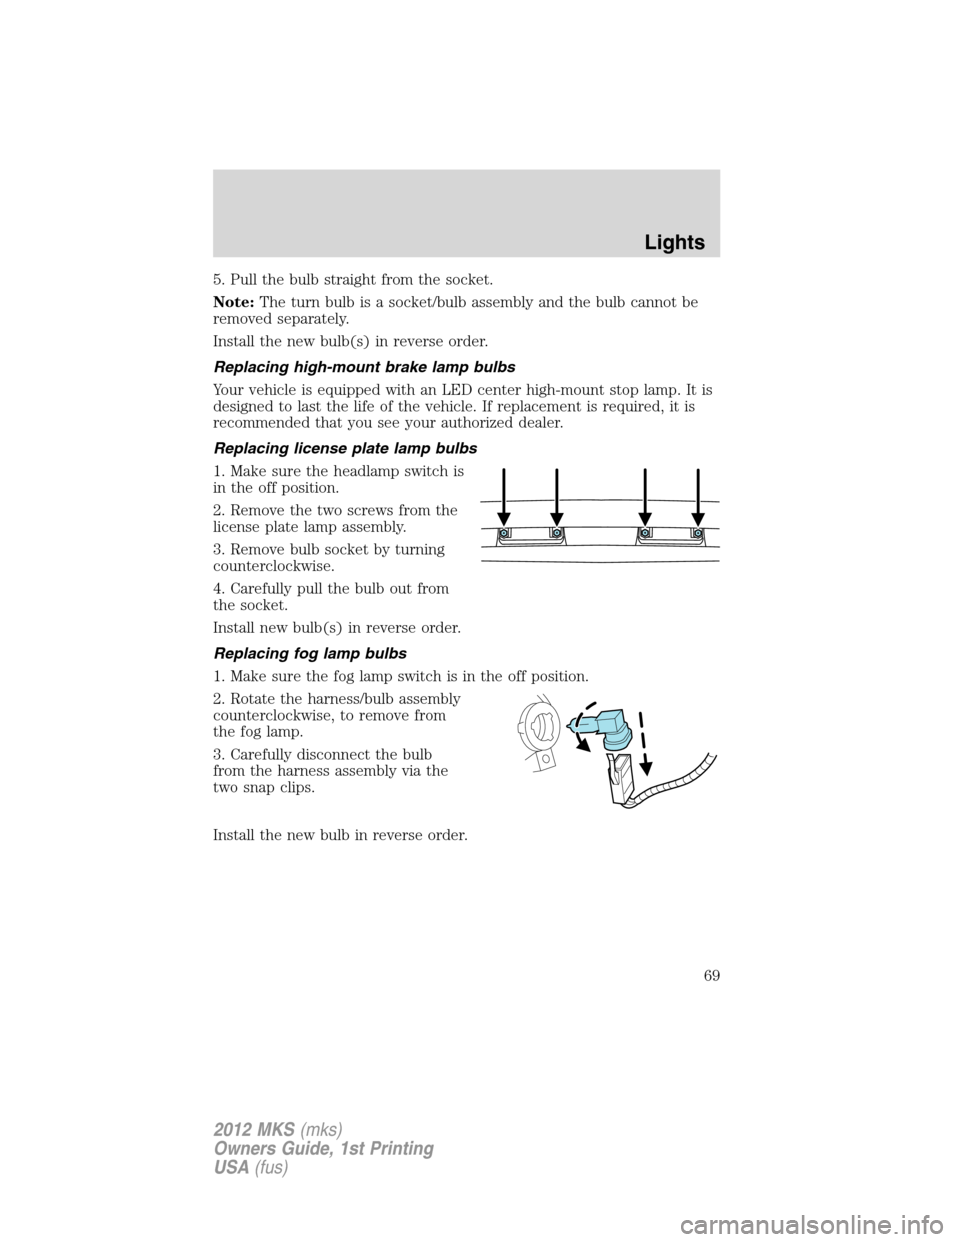 LINCOLN MKS 2012  Owners Manual 5. Pull the bulb straight from the socket.
Note:The turn bulb is a socket/bulb assembly and the bulb cannot be
removed separately.
Install the new bulb(s) in reverse order.
Replacing high-mount brake 